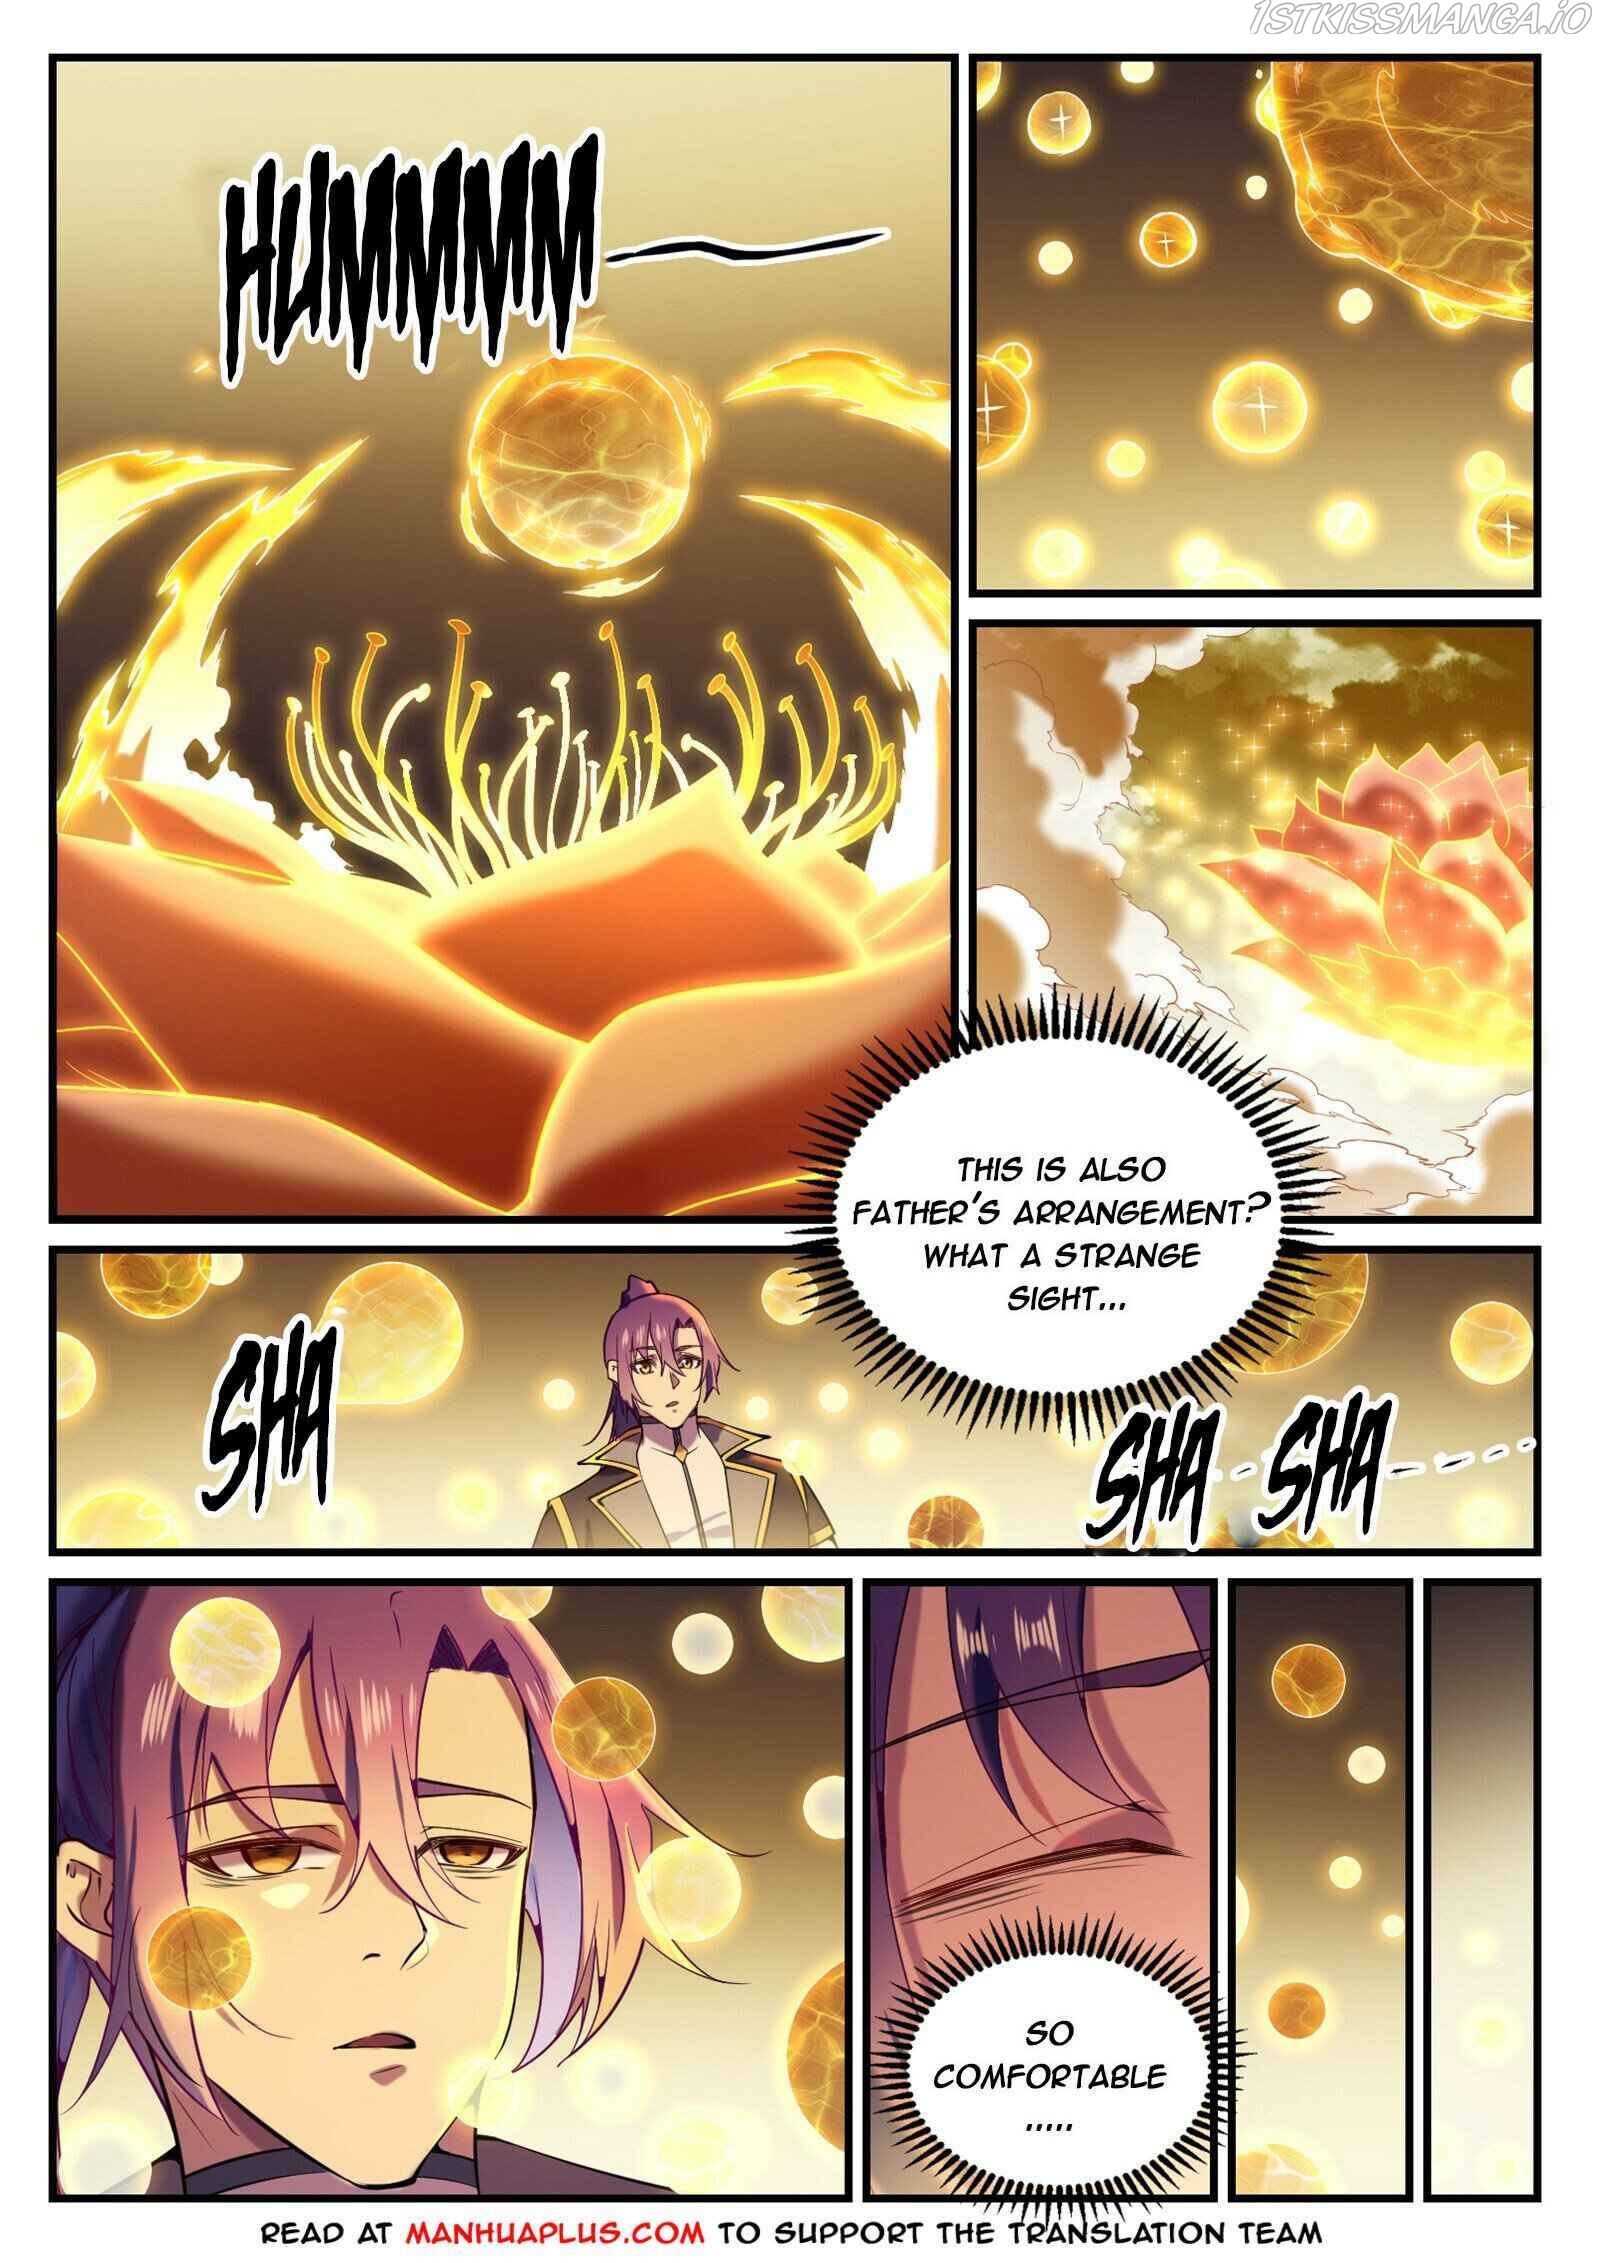 Apotheosis Chapter 837 - Page 7